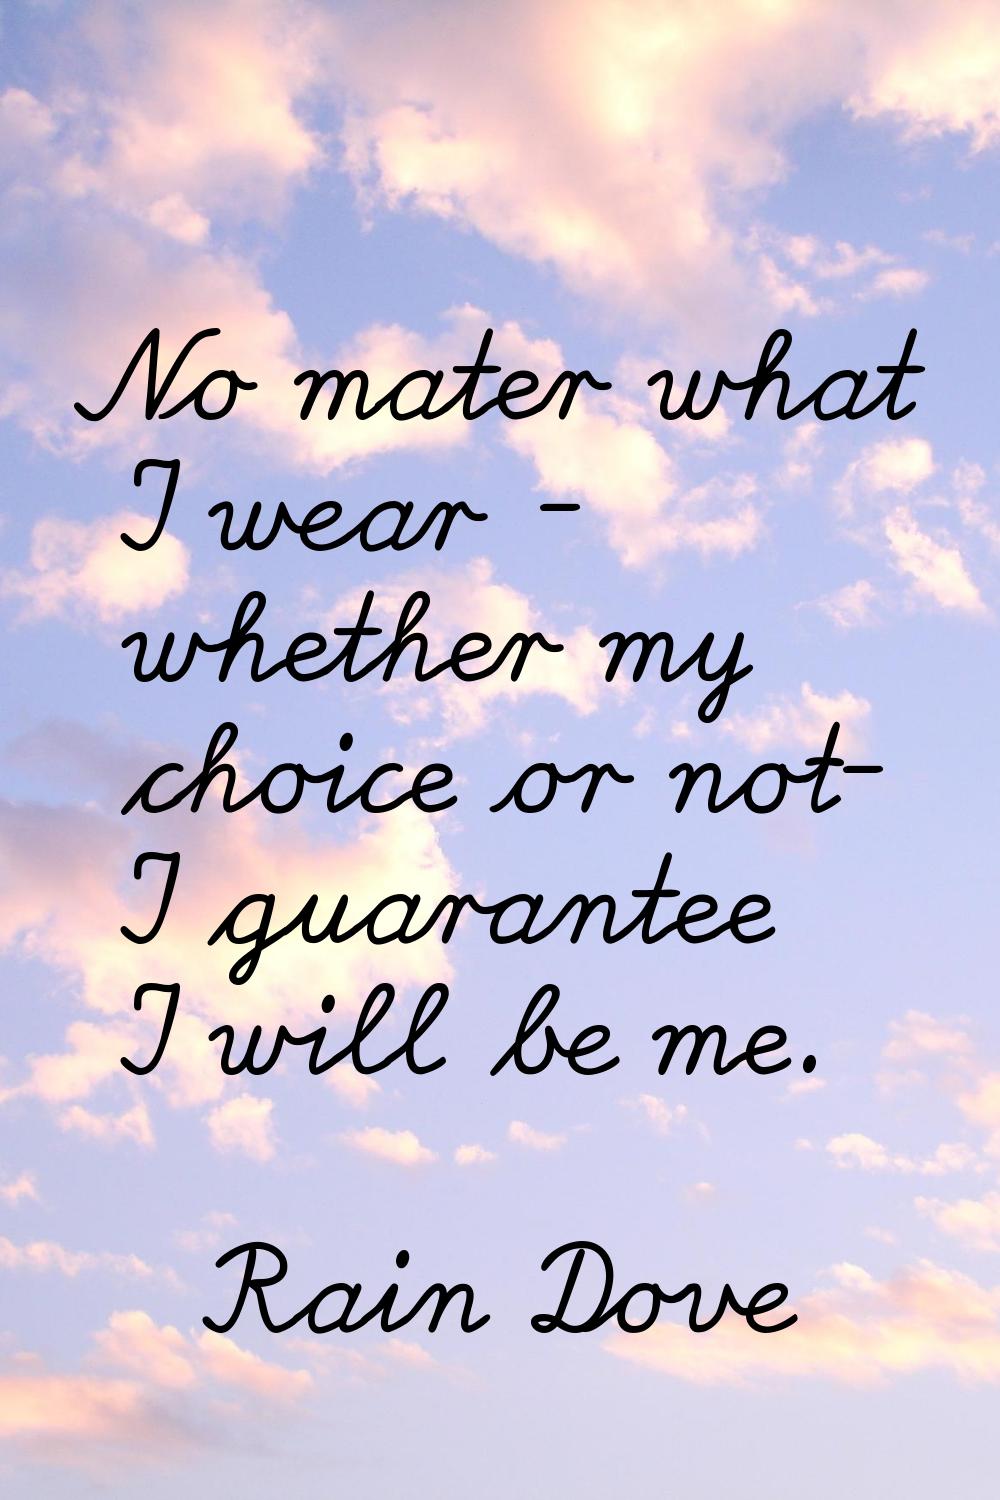 No mater what I wear - whether my choice or not- I guarantee I will be me.